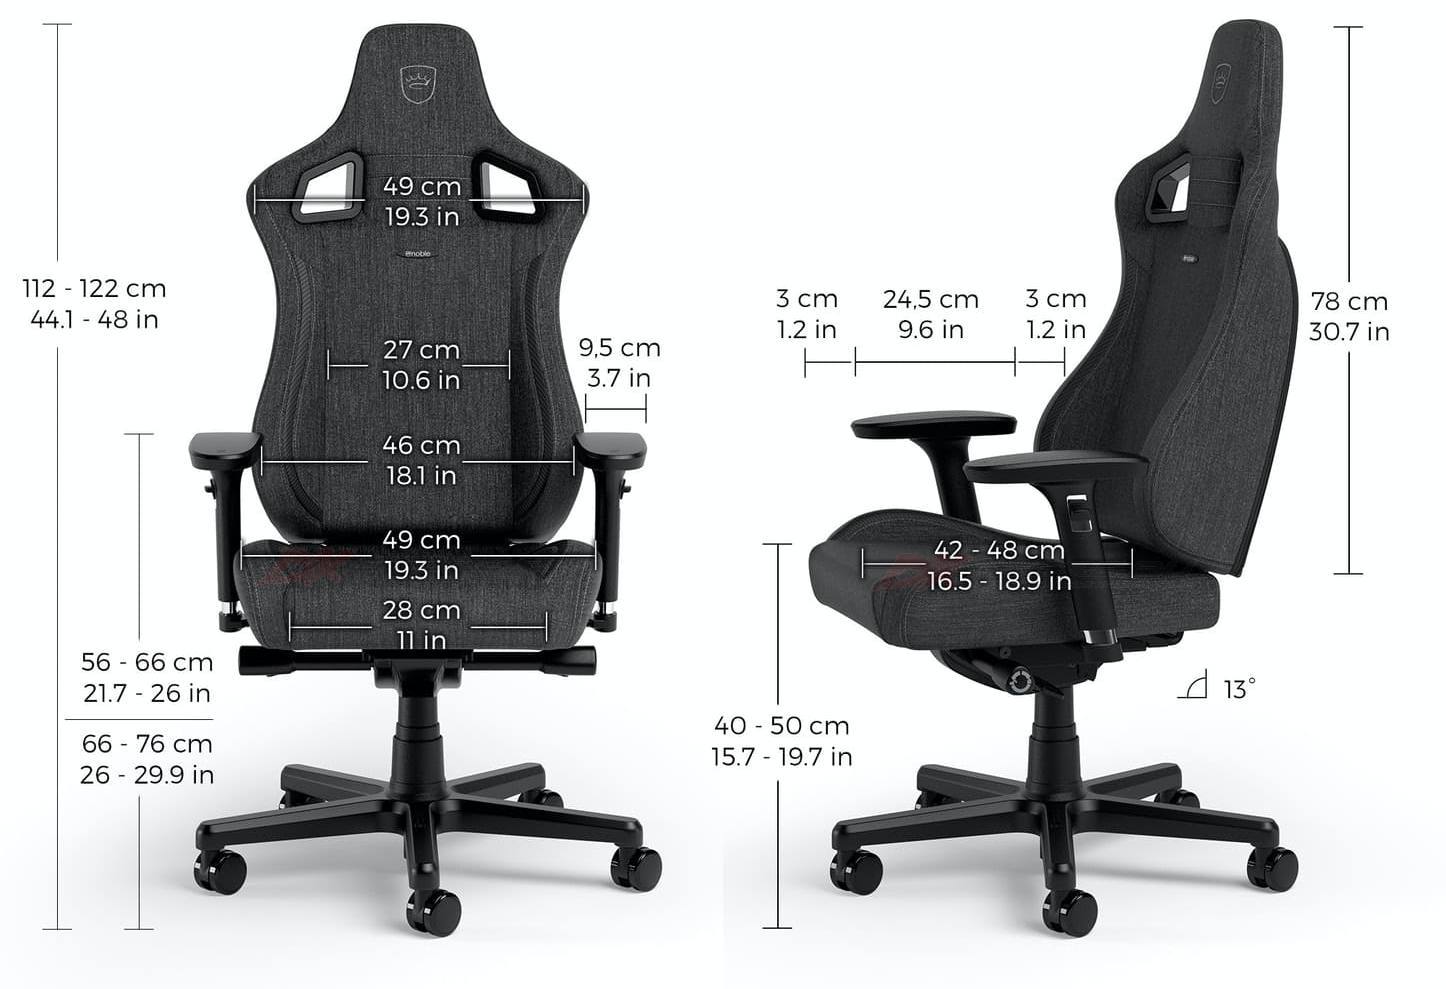 noblechairs EPIC Compact Fabric Anthracite - Размеры